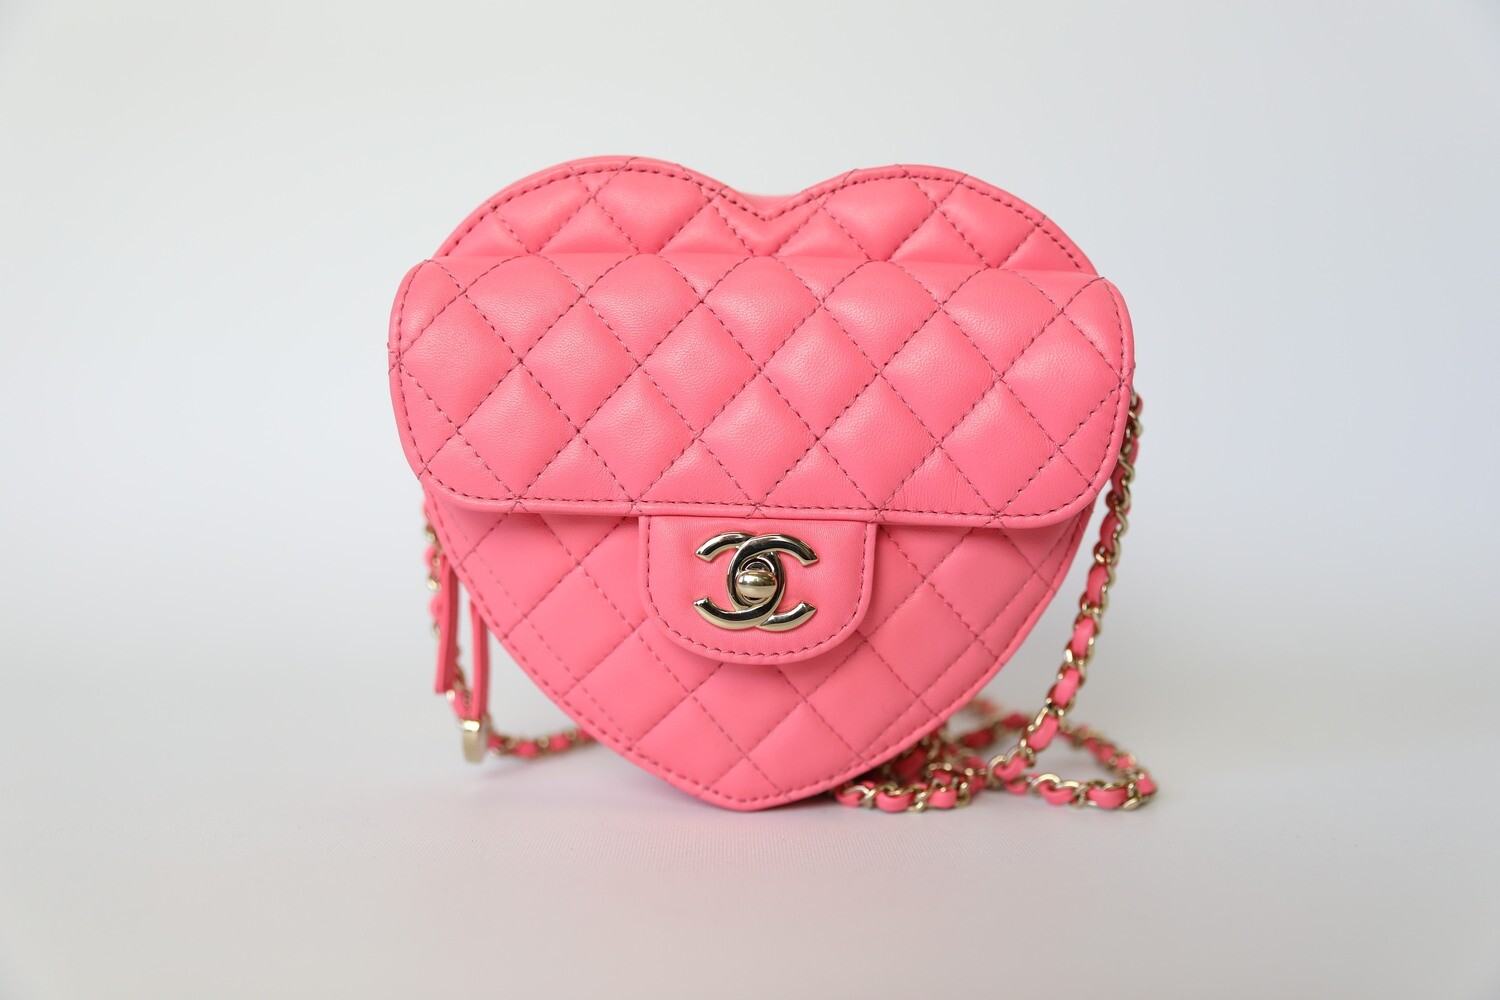 Chanel Heart Bag CC In Love, Large Pink Lambskin Quilted With Gold Hardware  Preowned In Dustbag, WA001